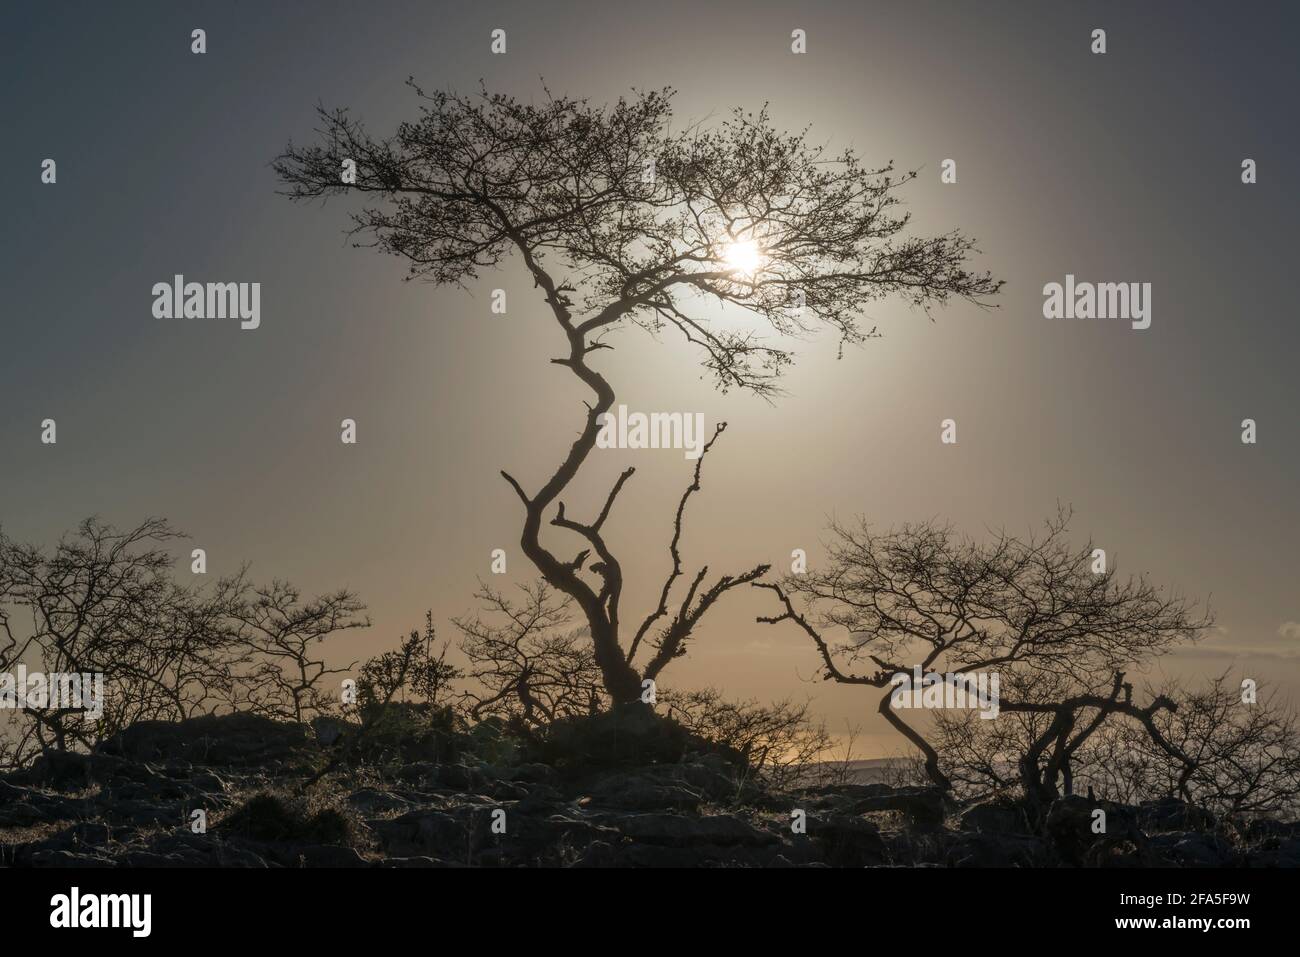 Backlight image of a barren tree in the dry season, Dhofar Governorate, Oman. Stock Photo